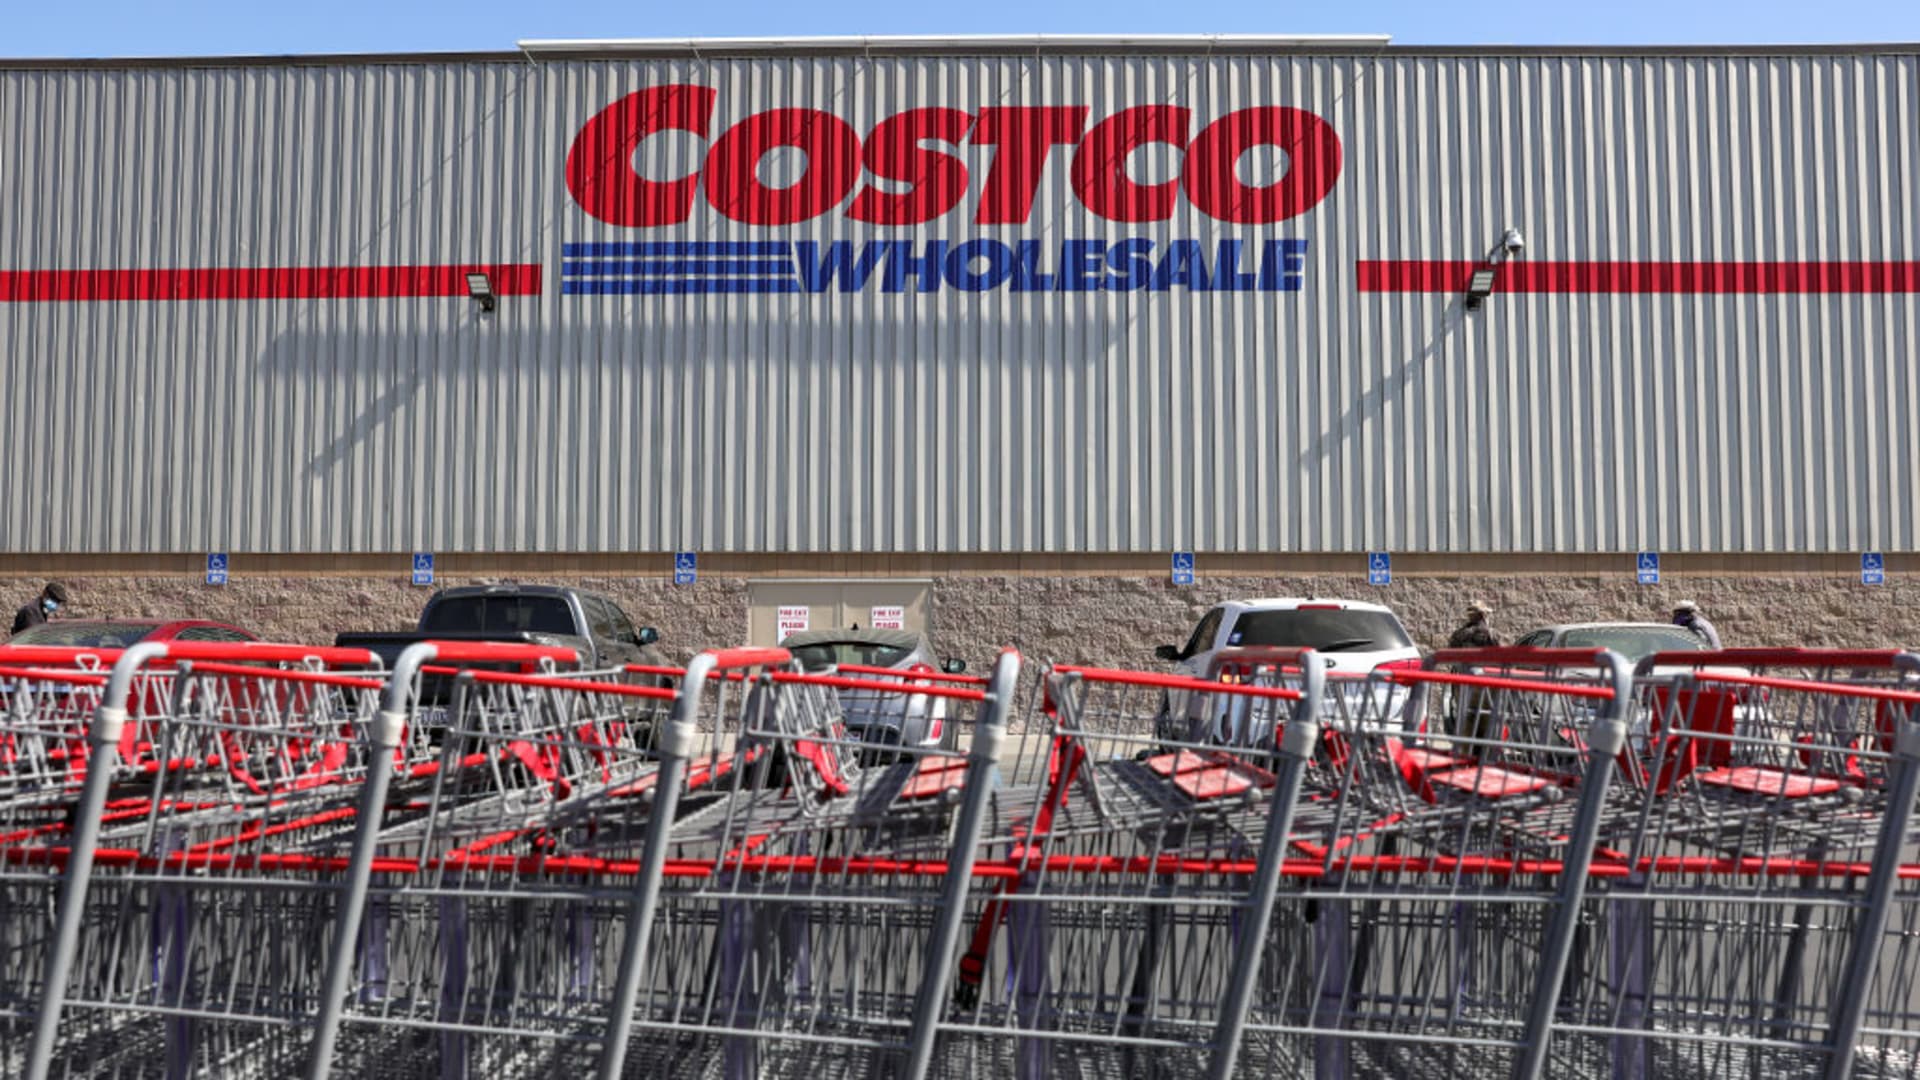 Costco's quarterly results indicate the retailer is thriving despite high inflation